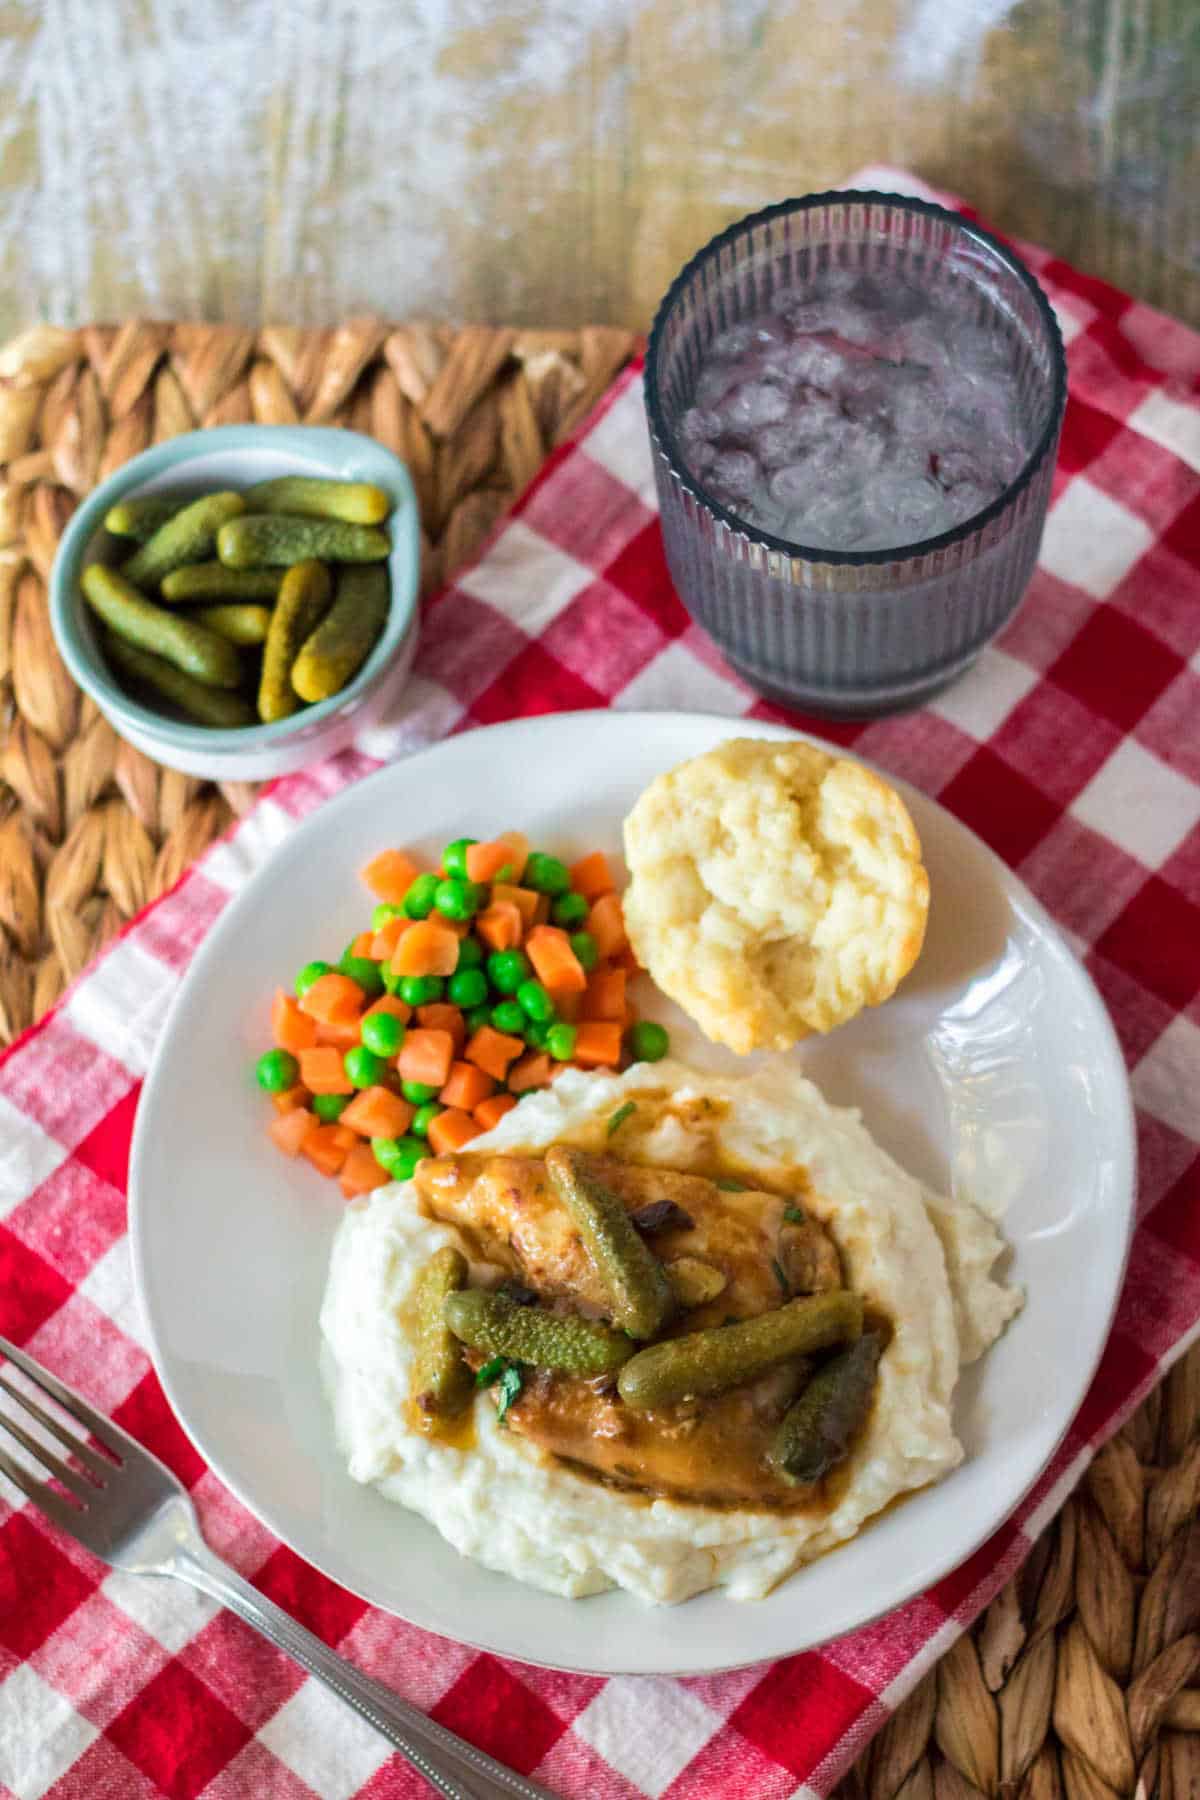 A plate with pickle chicken, mashed potatoes, peas, carrots and a bun.